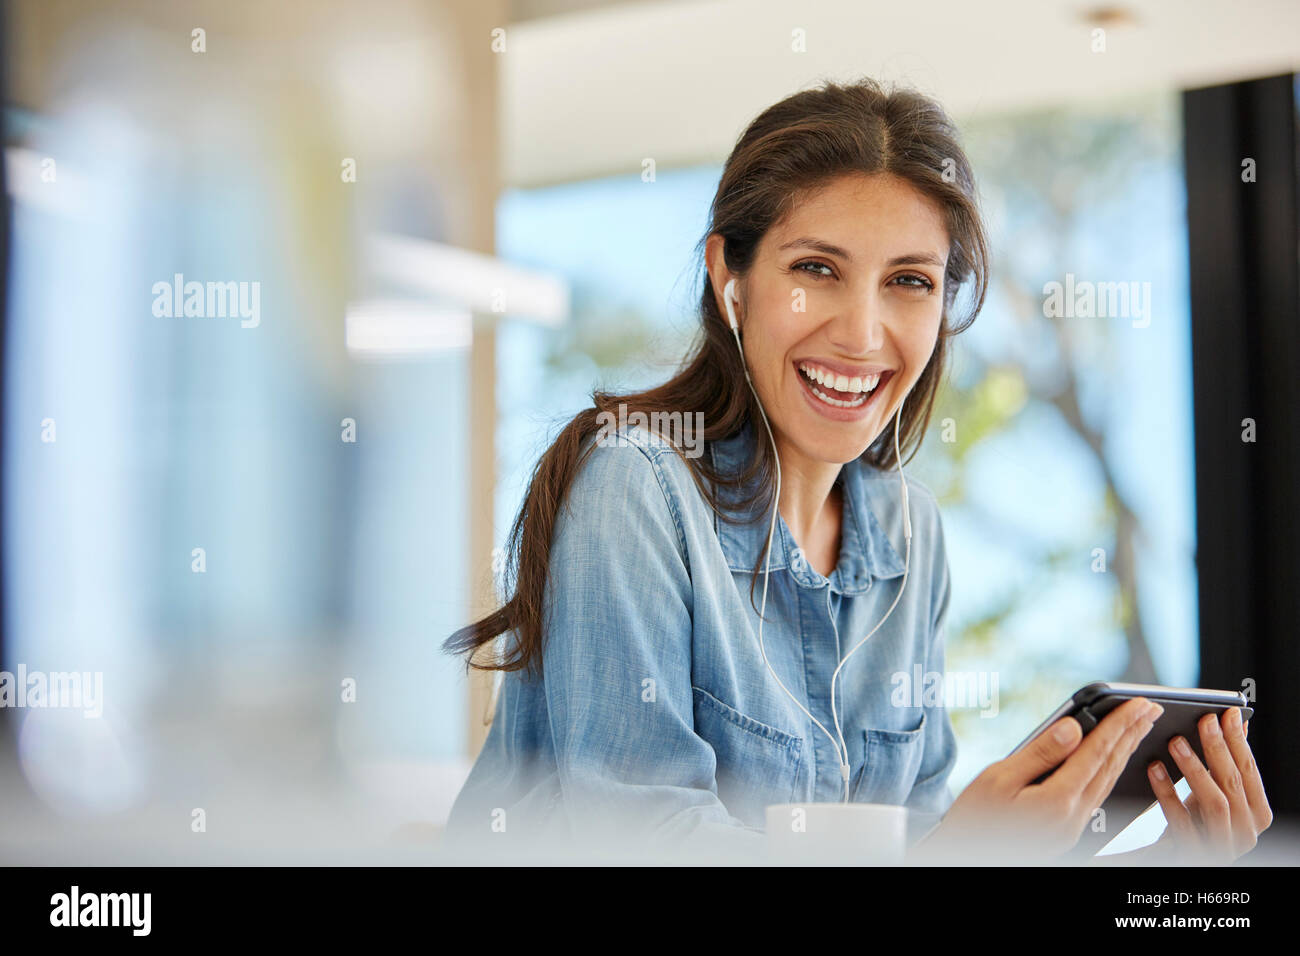 Portrait enthusiastic woman using digital tablet and headphones Stock Photo